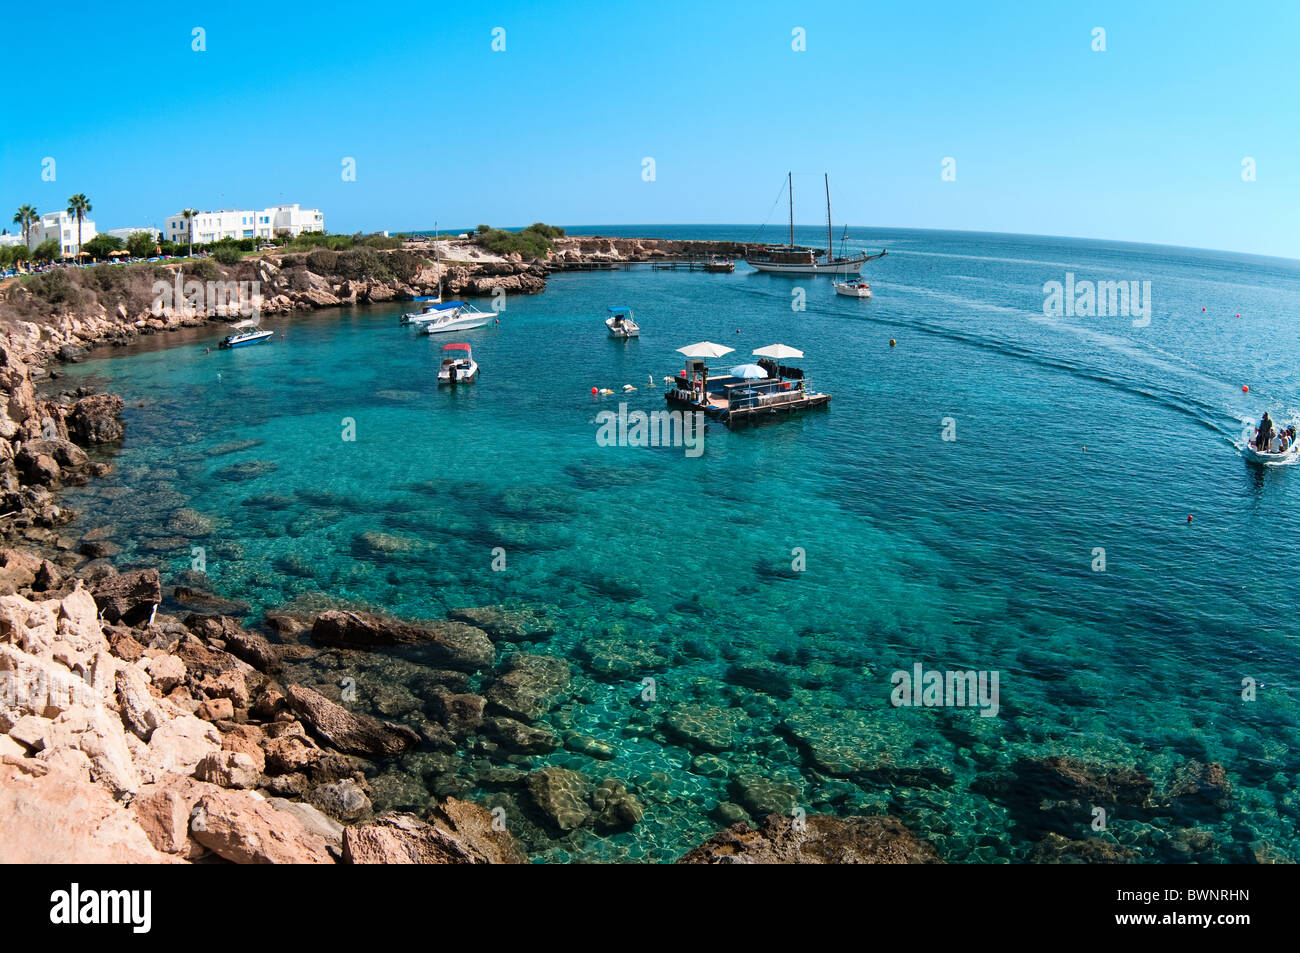 Bay for scuba diving in the Mediterranean sea with motor boats and a platform for diving. People go on a vessel Stock Photo